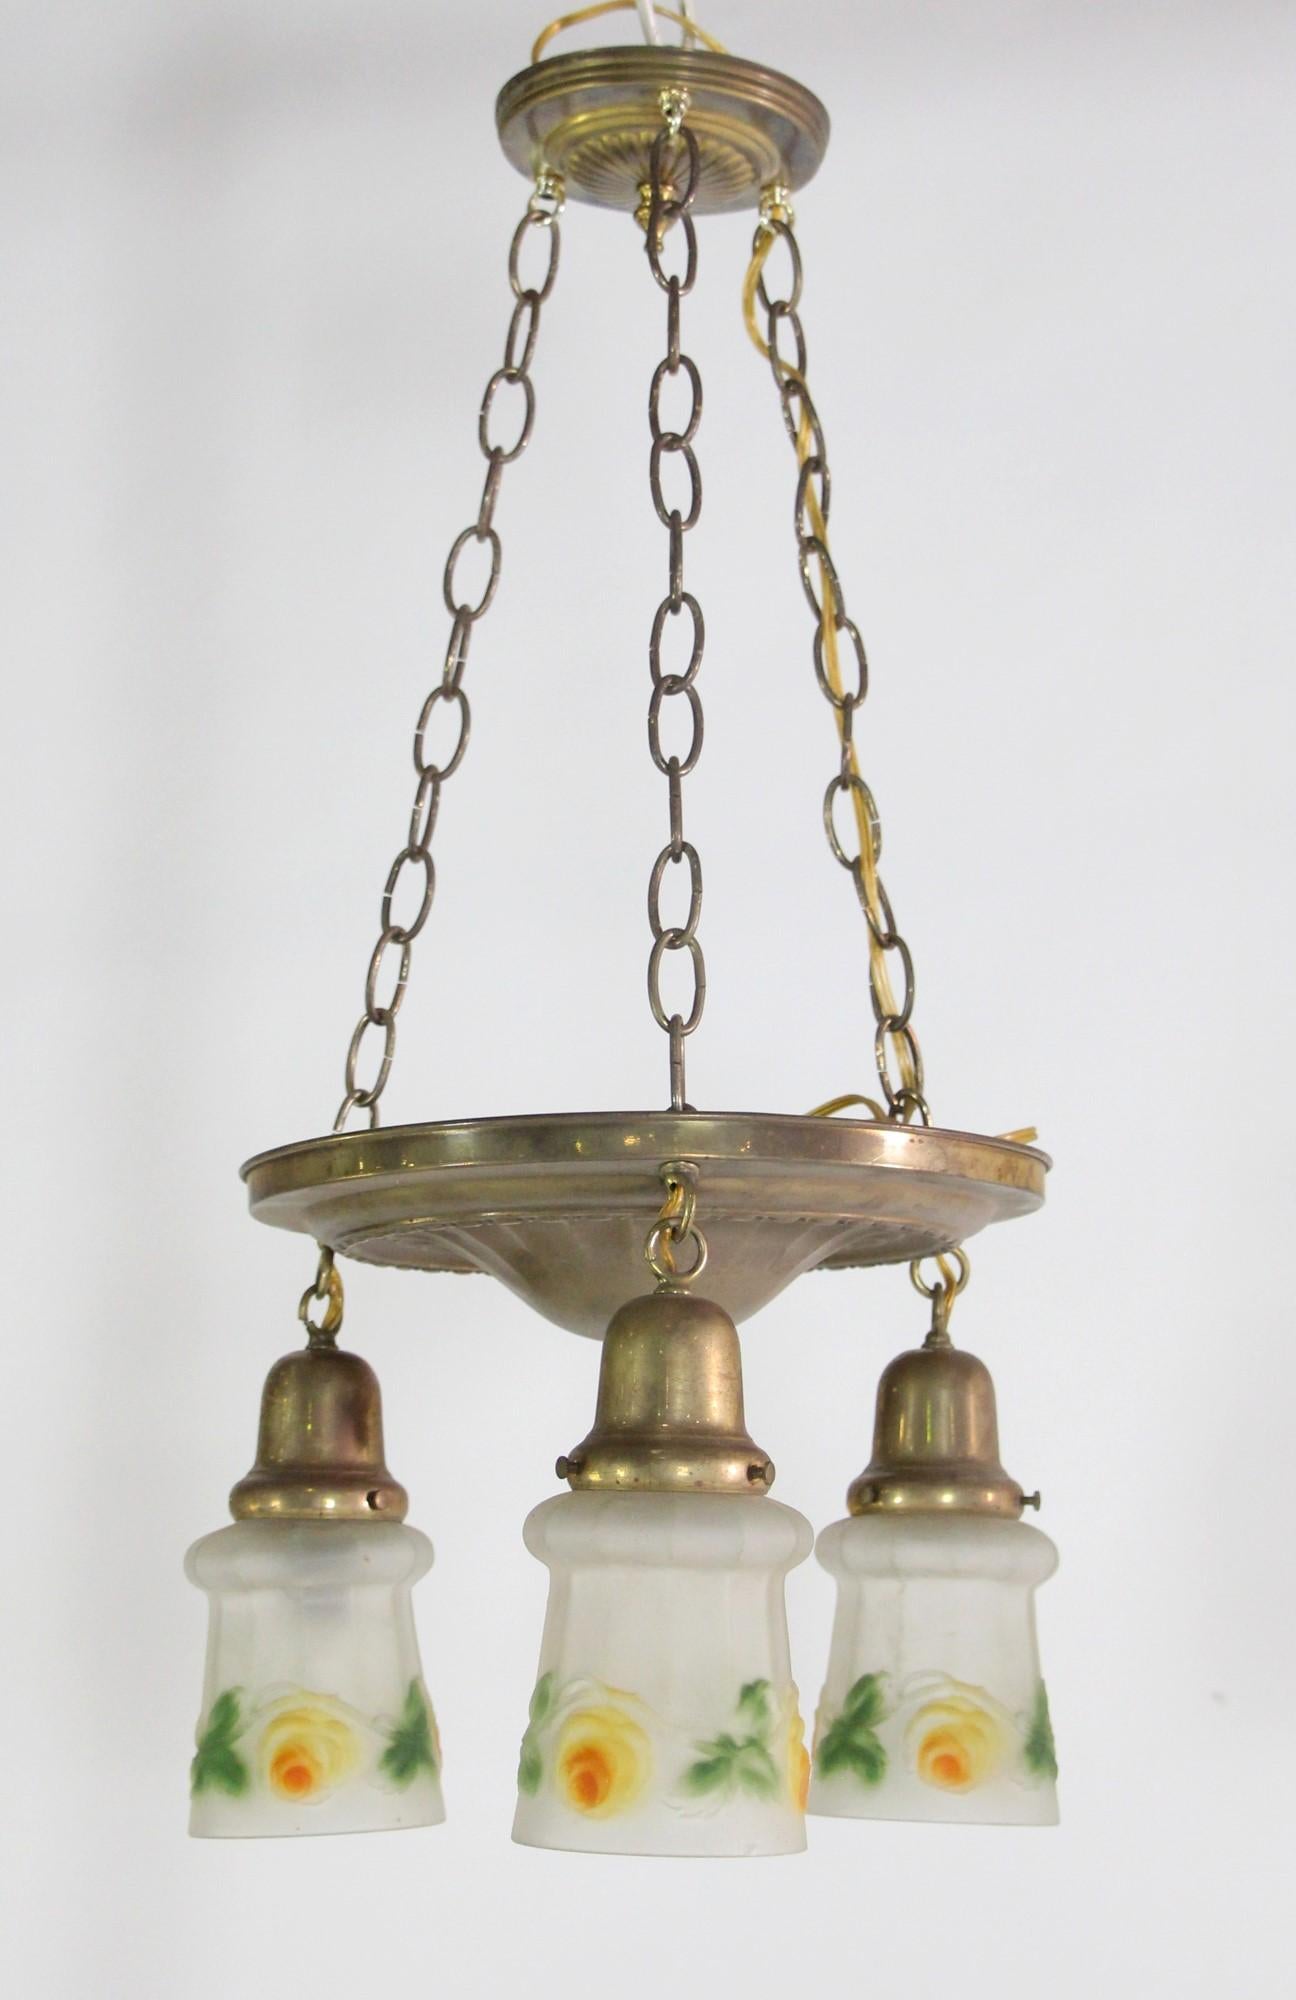 Brass pendant light featuring 3 hanging lights with antique hand-painted glass shades. The shades are frosted with an orange, yellow and green floral detail. The hardware is newer making it wired and ready to go. This can be seen at our 400 Gilligan